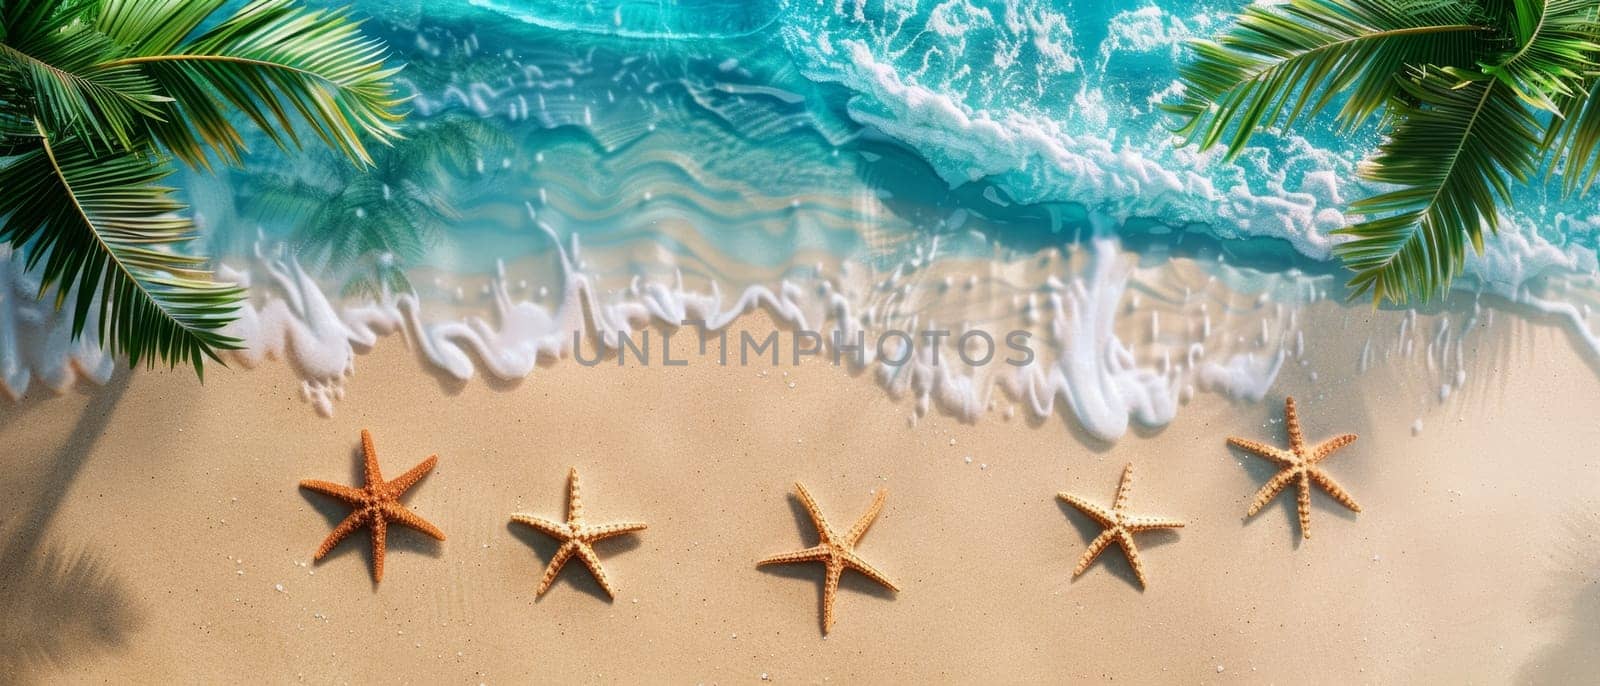 A tranquil beach scene with starfish on the sand and the calming shade of palm leaves at the water's edge. Copy space for advertising, presentation product or text